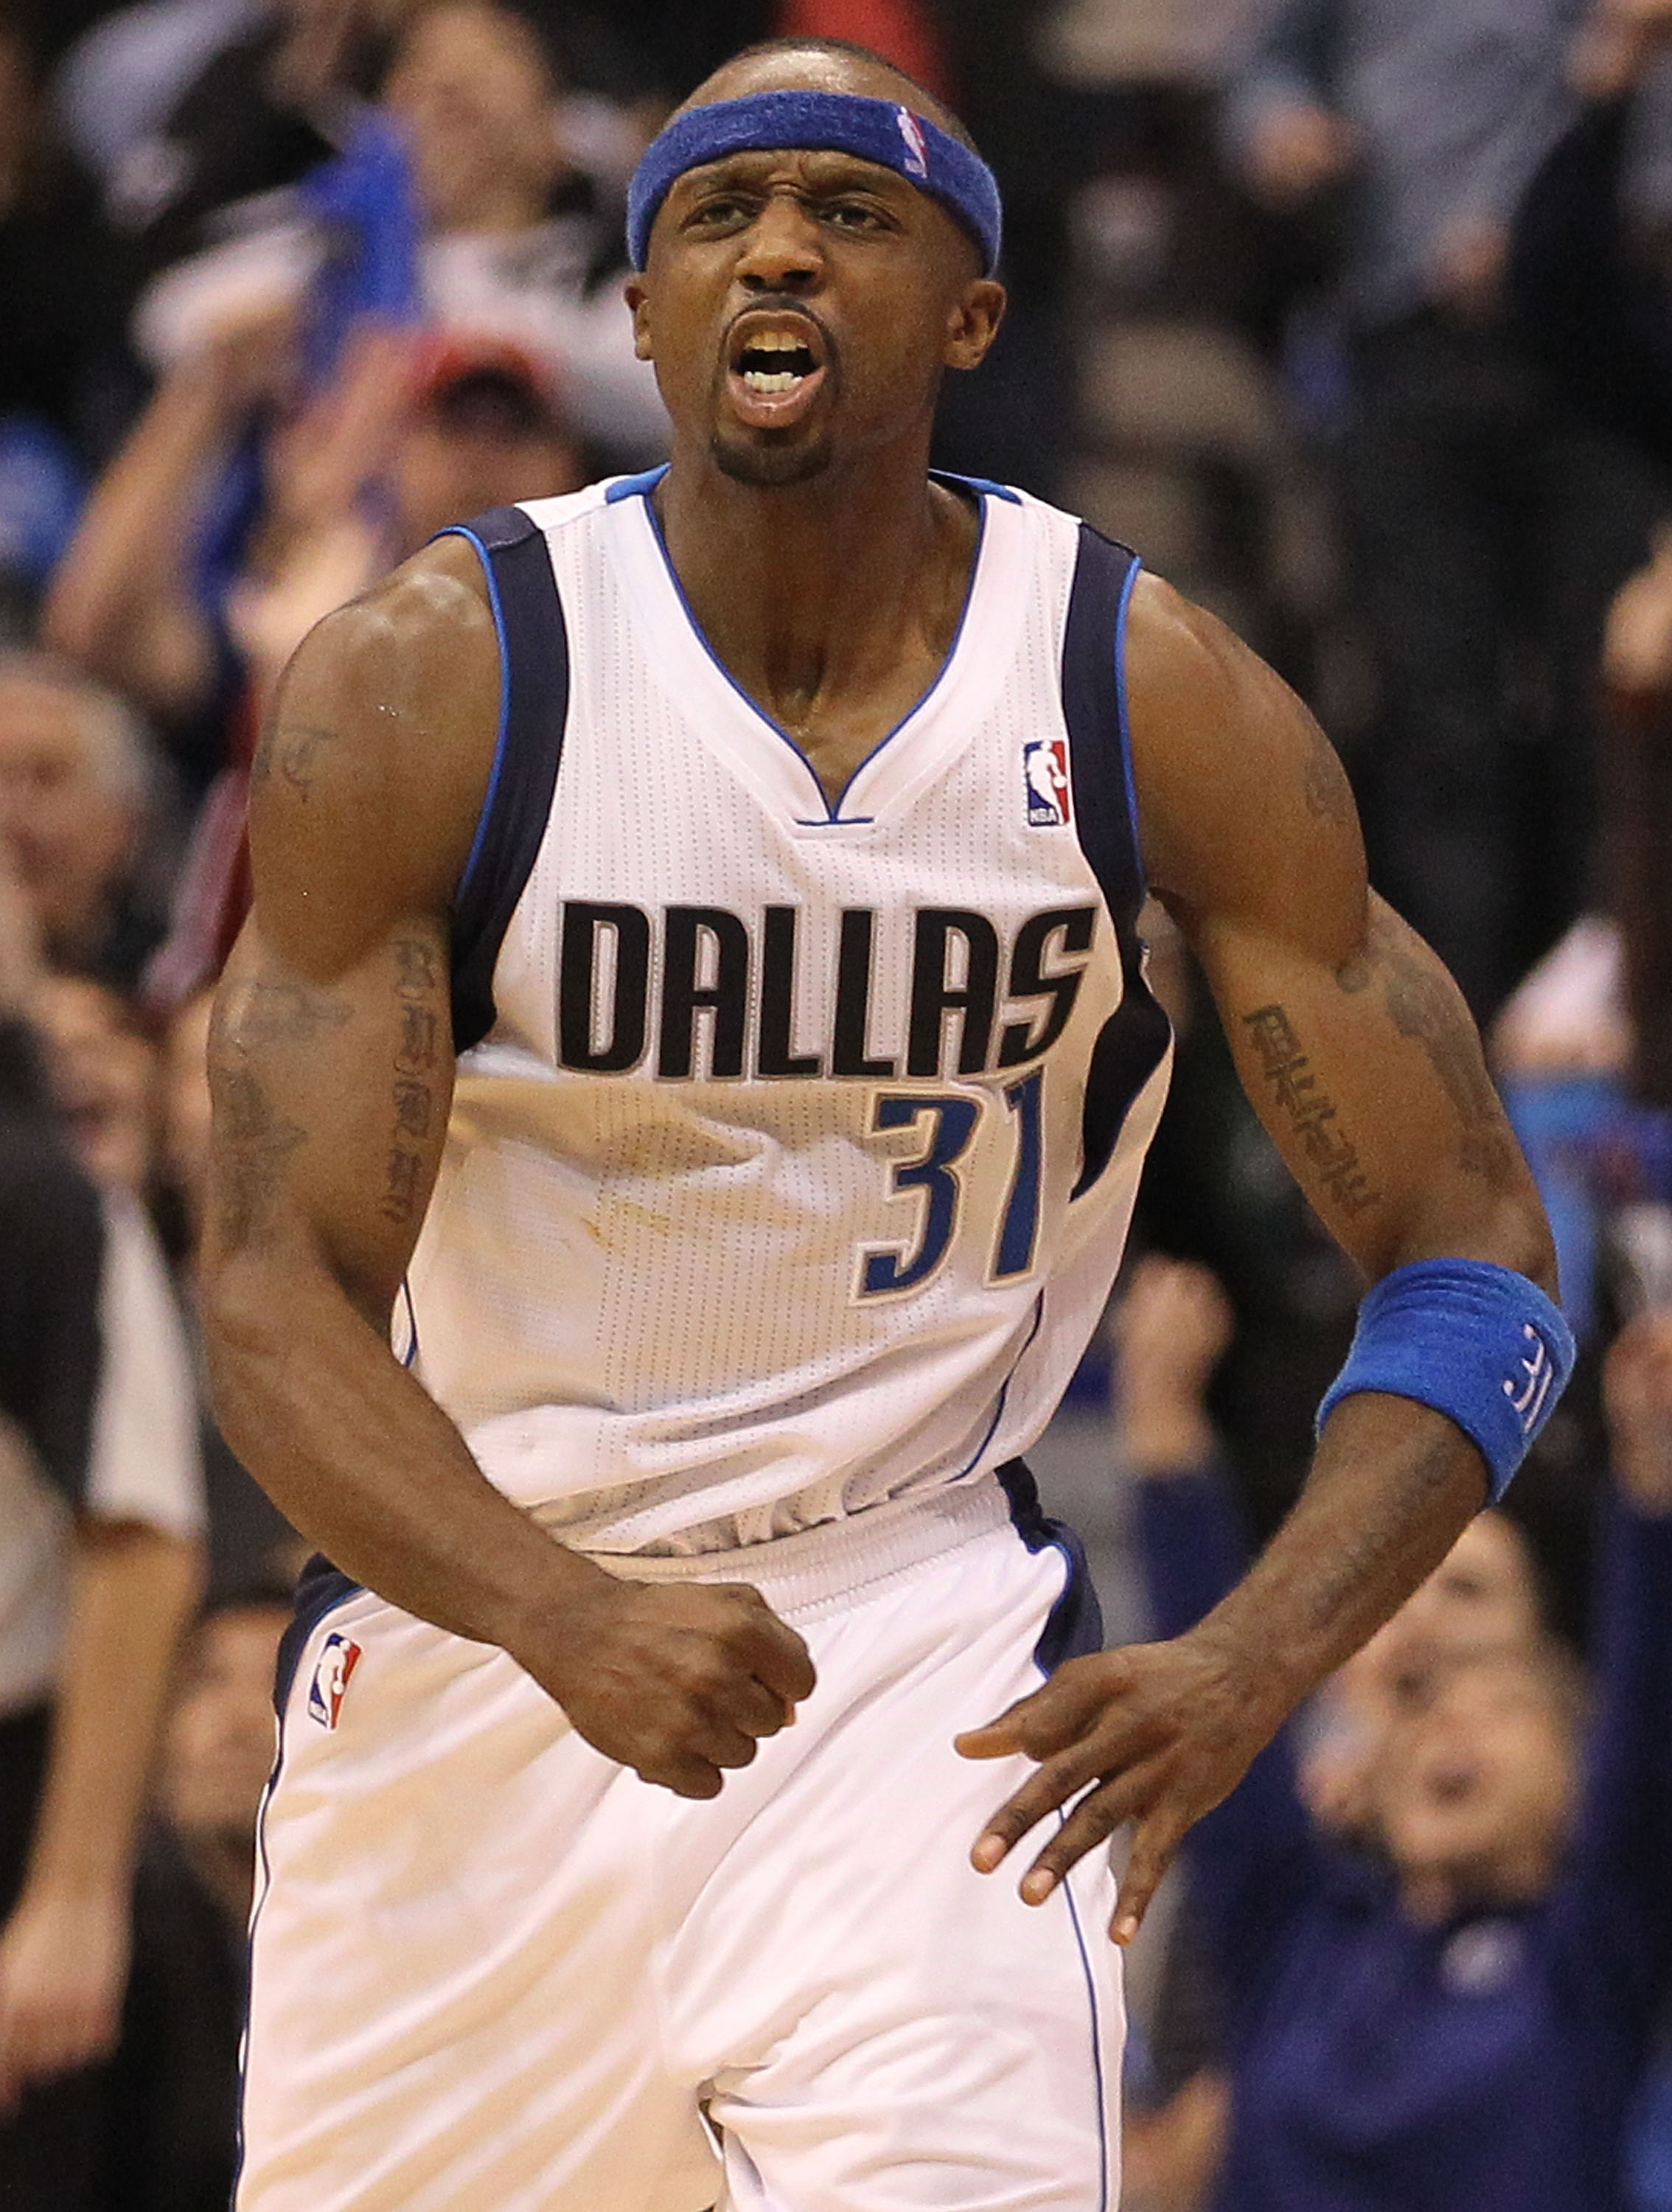 DALLAS, TX - JANUARY 04:  Guard Jason Terry #31 of the Dallas Mavericks reacts during play against the Portland Trail Blazers at American Airlines Center on January 4, 2011 in Dallas, Texas.  NOTE TO USER: User expressly acknowledges and agrees that, by d